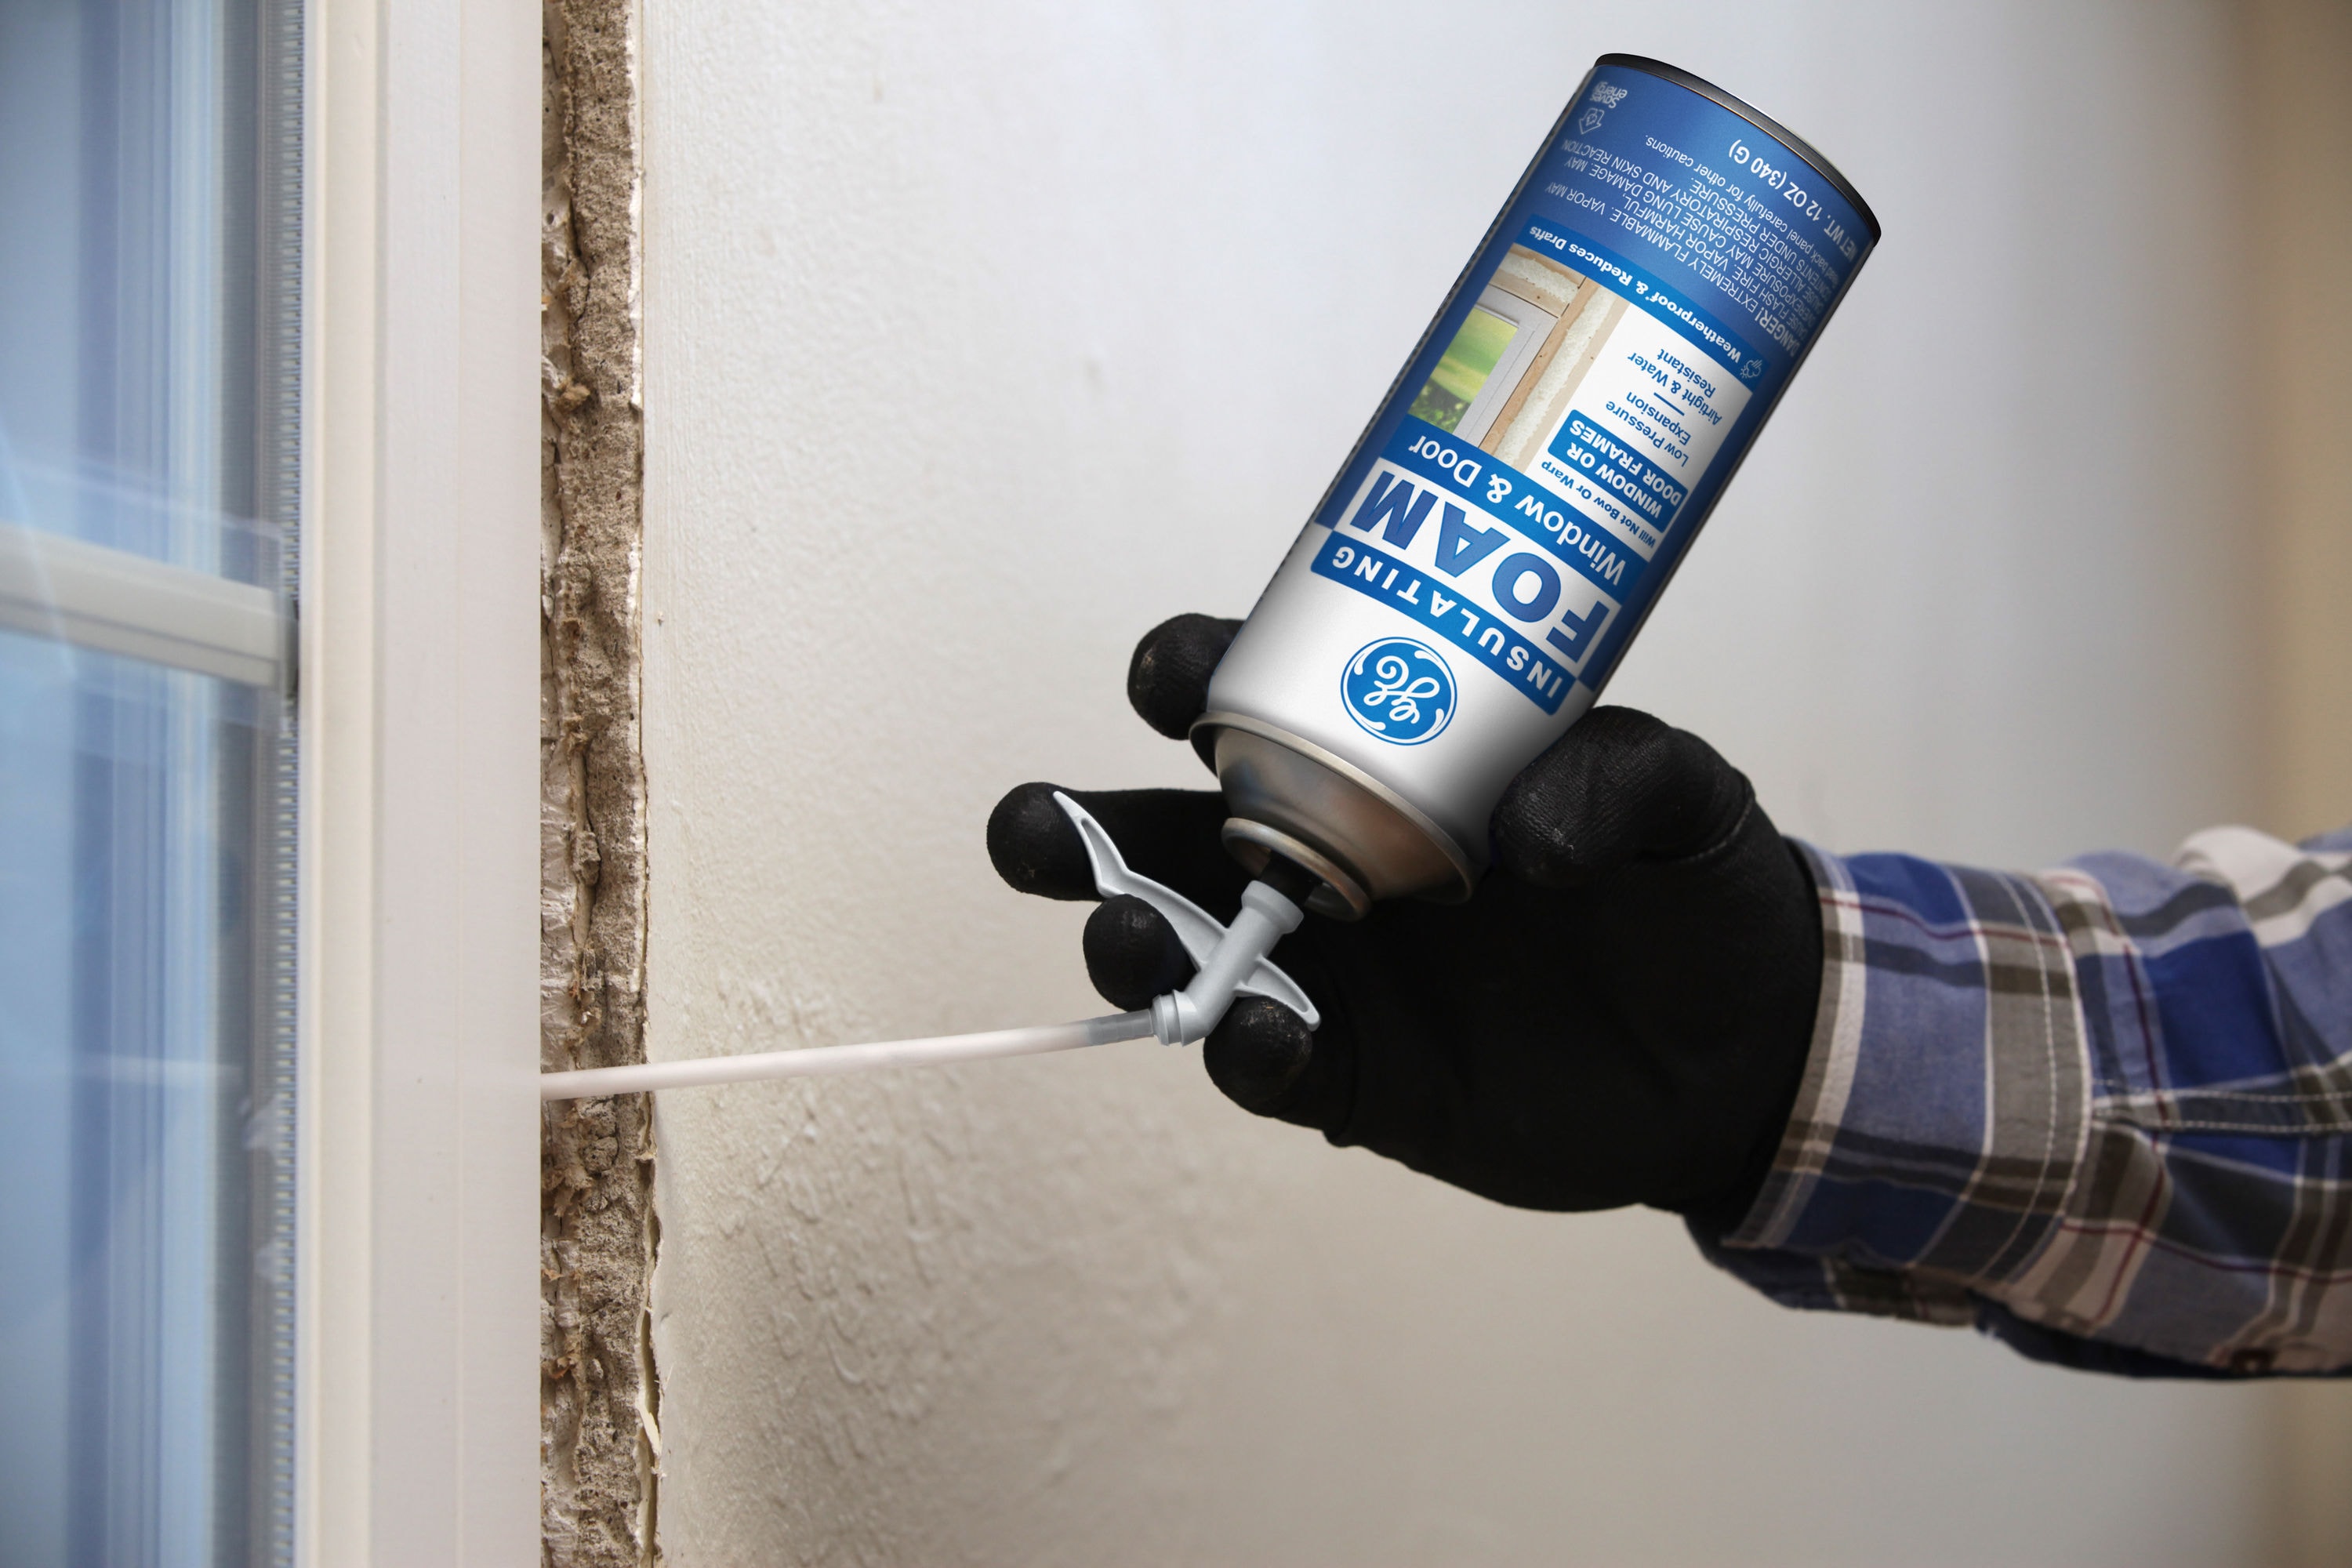 4 Cans 16 Oz. Window and Door Insulating Spray Foam Sealant with